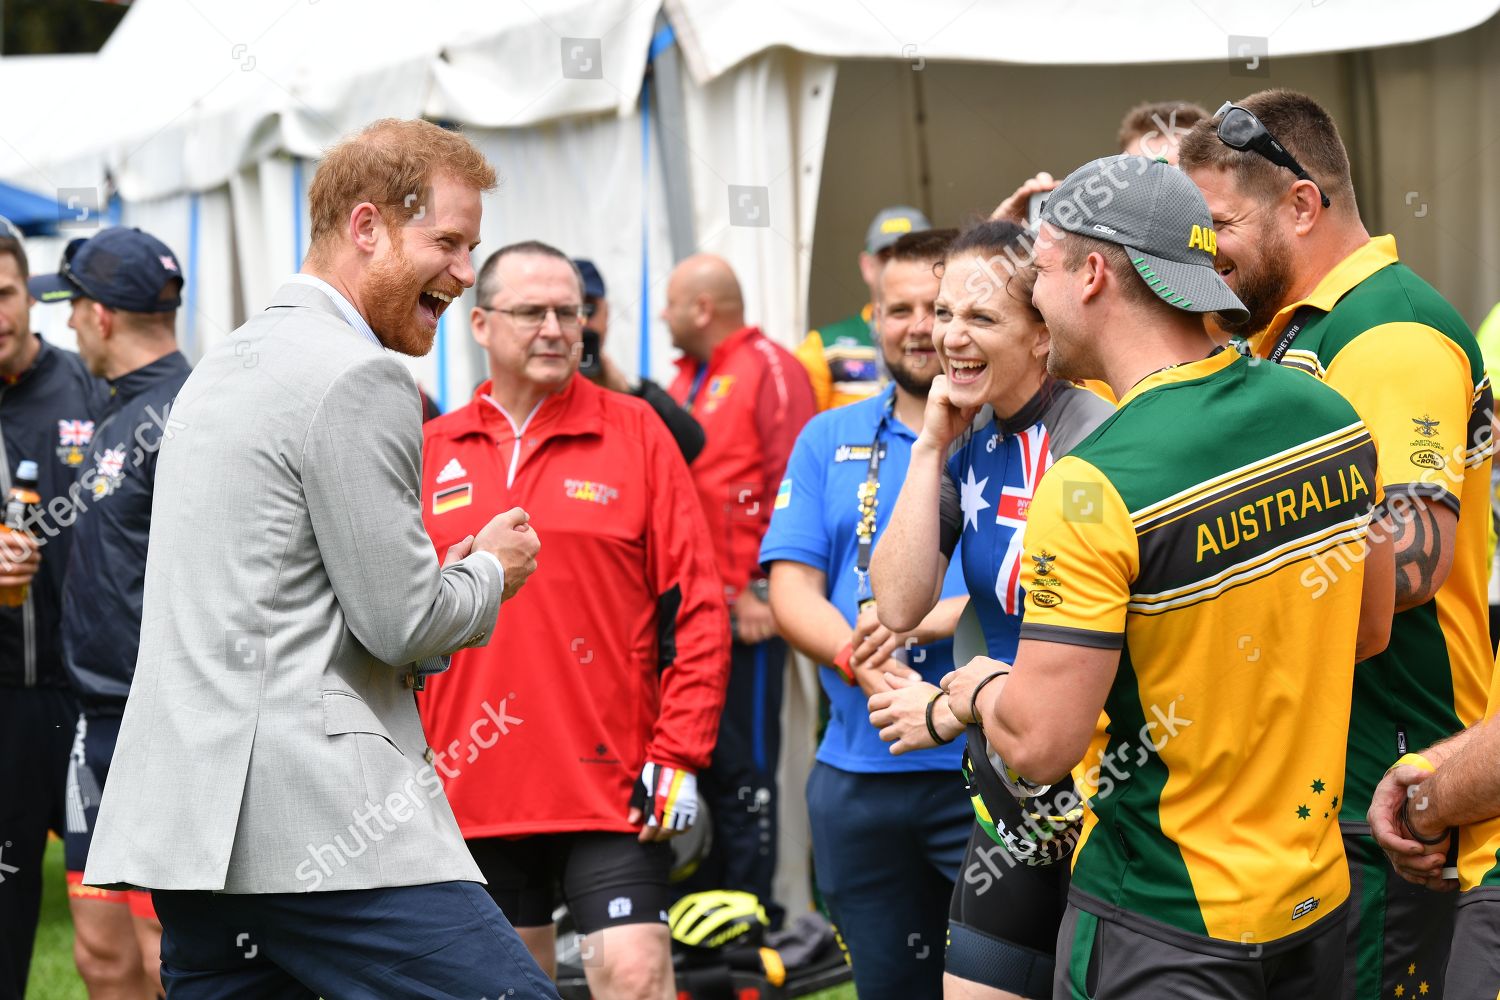 prince-harry-and-meghan-duchess-of-sussex-tour-of-australia-shutterstock-editorial-9939300g.jpg